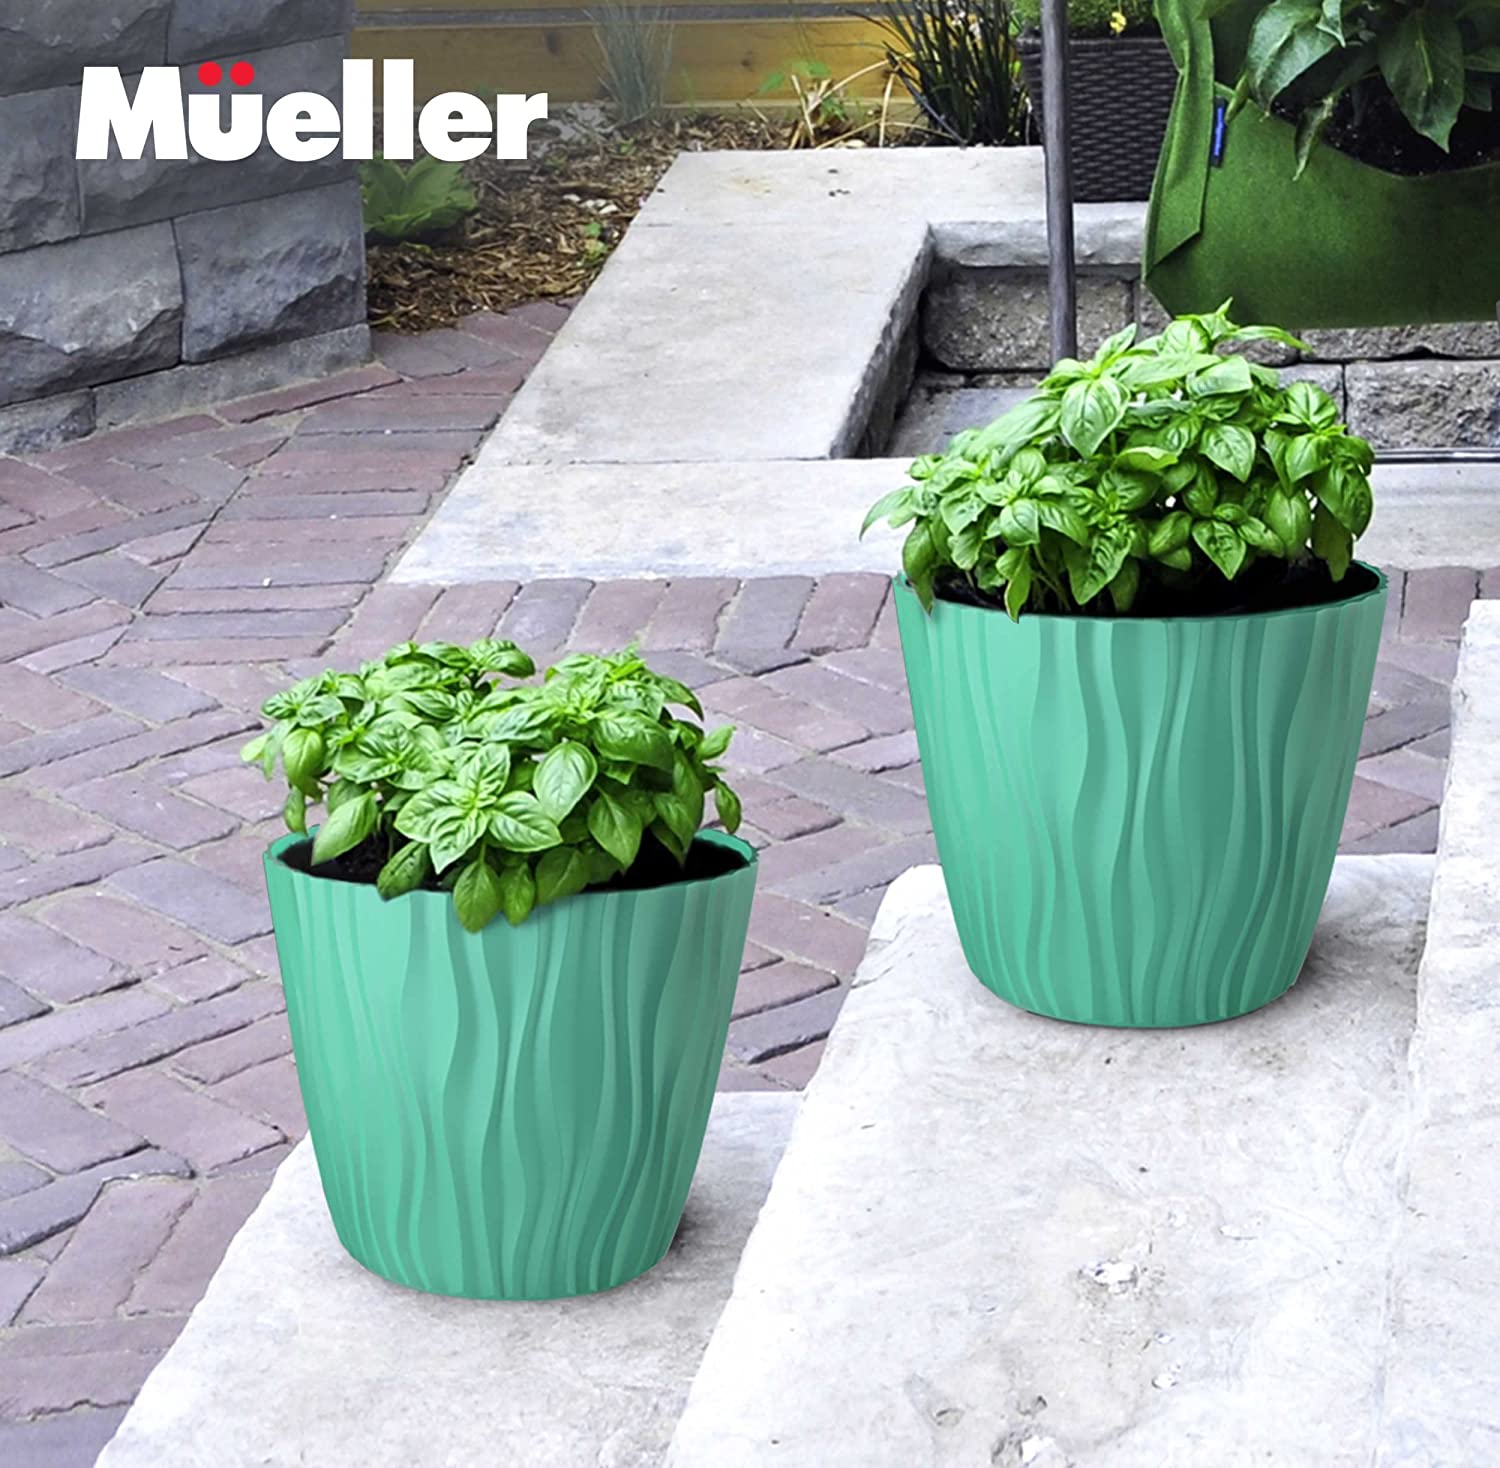 muellerhome_Decorative-Plant-and-Flower-Pots- Small-2-Piece-Green-Set-7